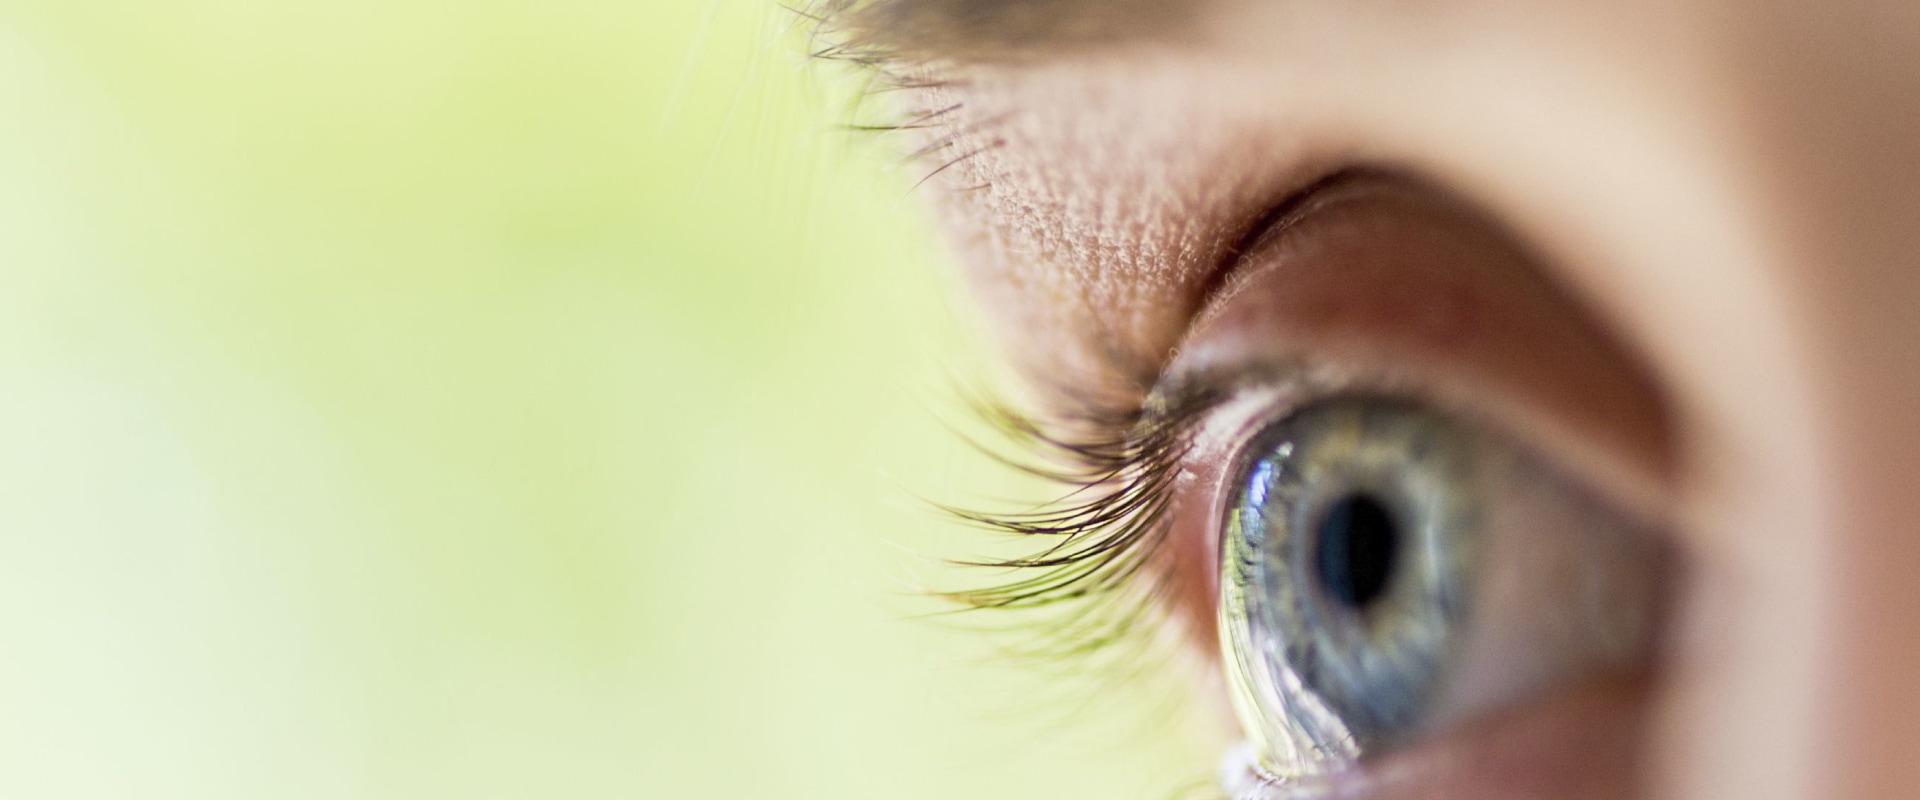 Are there any medications that should be avoided before and after having lasik eye surgery?